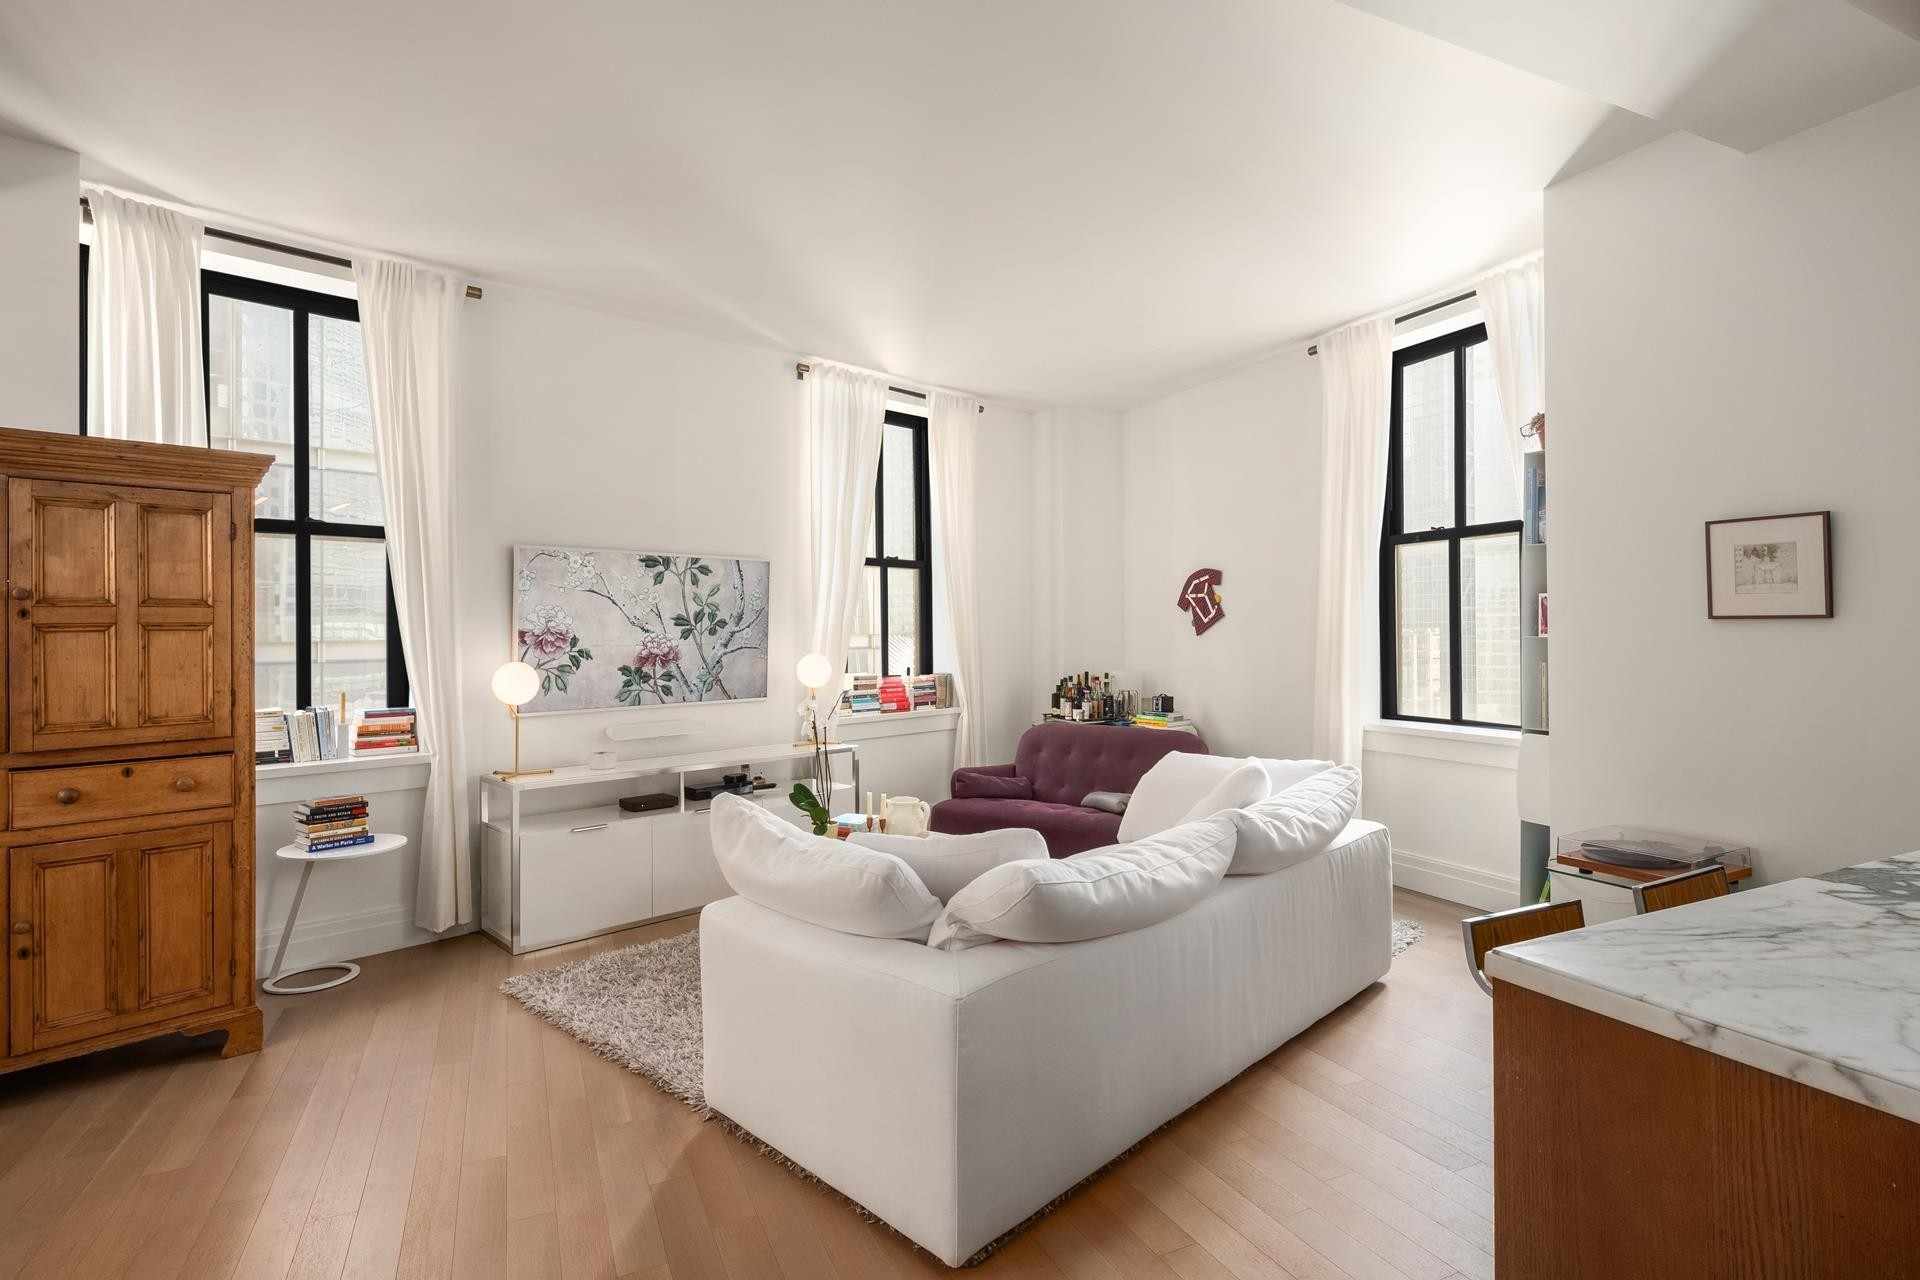 Condominium for Sale at One Hundred Barclay, 100 BARCLAY ST, 15L TriBeCa, New York, New York 10007